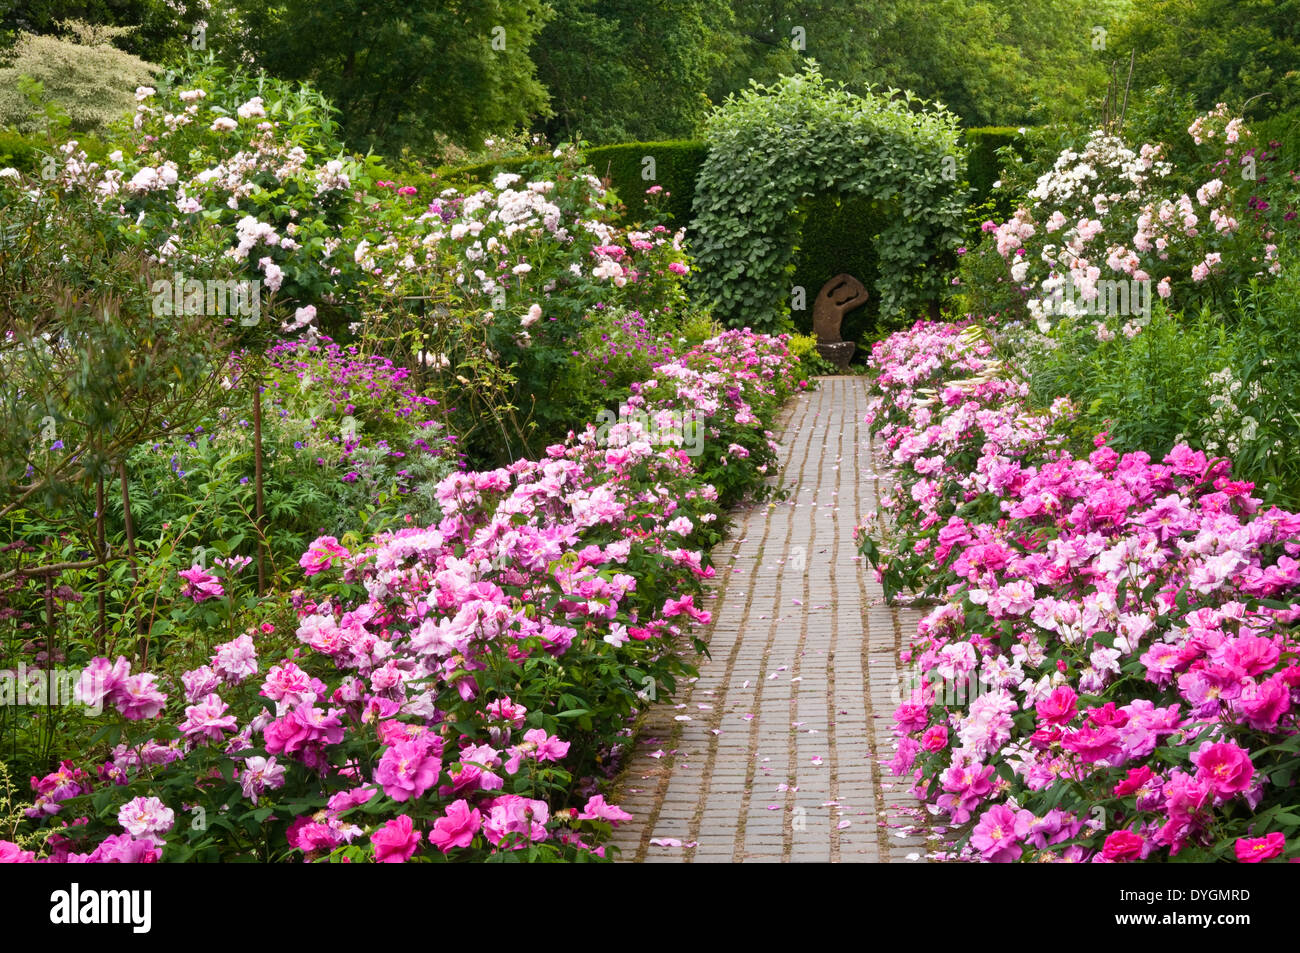 Colourful shades of pink roses line a brick-paved path in the Rose Border garden at Kiftsgate Court in the Cotswolds, Gloucestershire, England Stock Photo